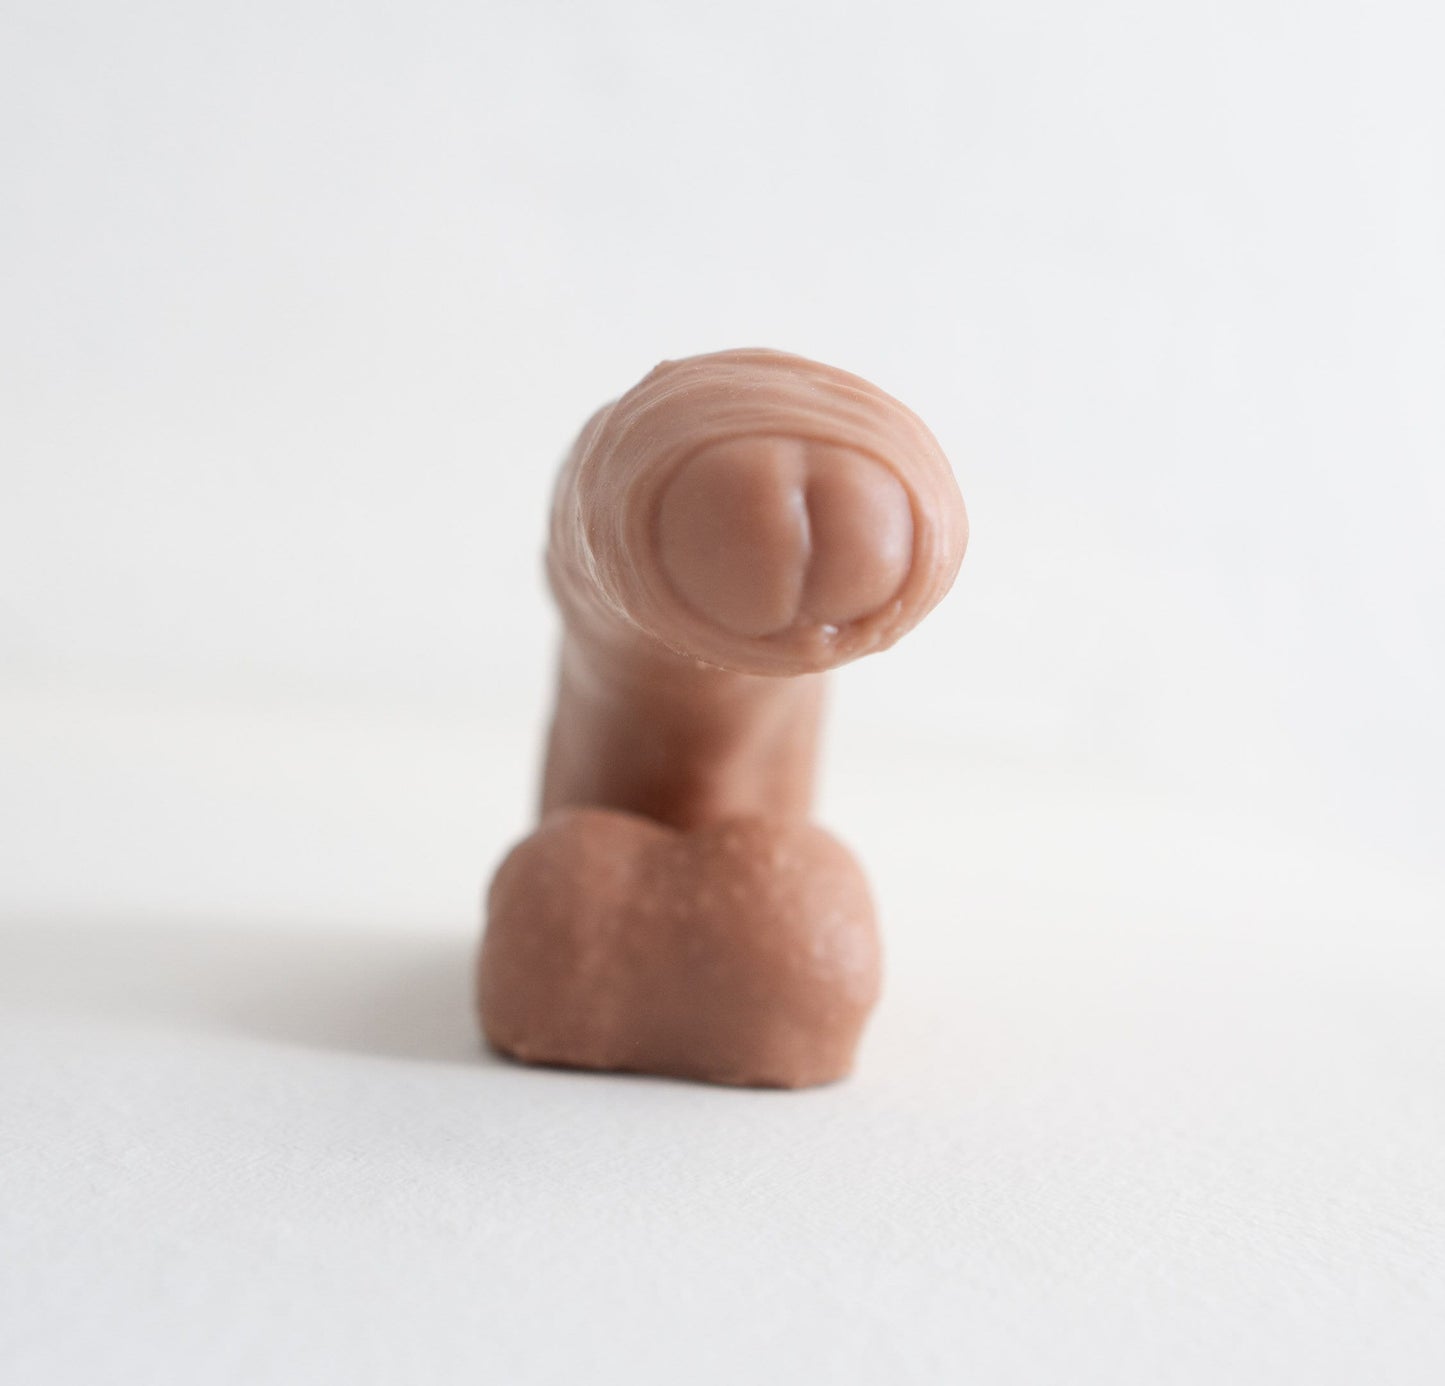 FTM Packer - 5.5 inch realistic penis - modeled after a real guy